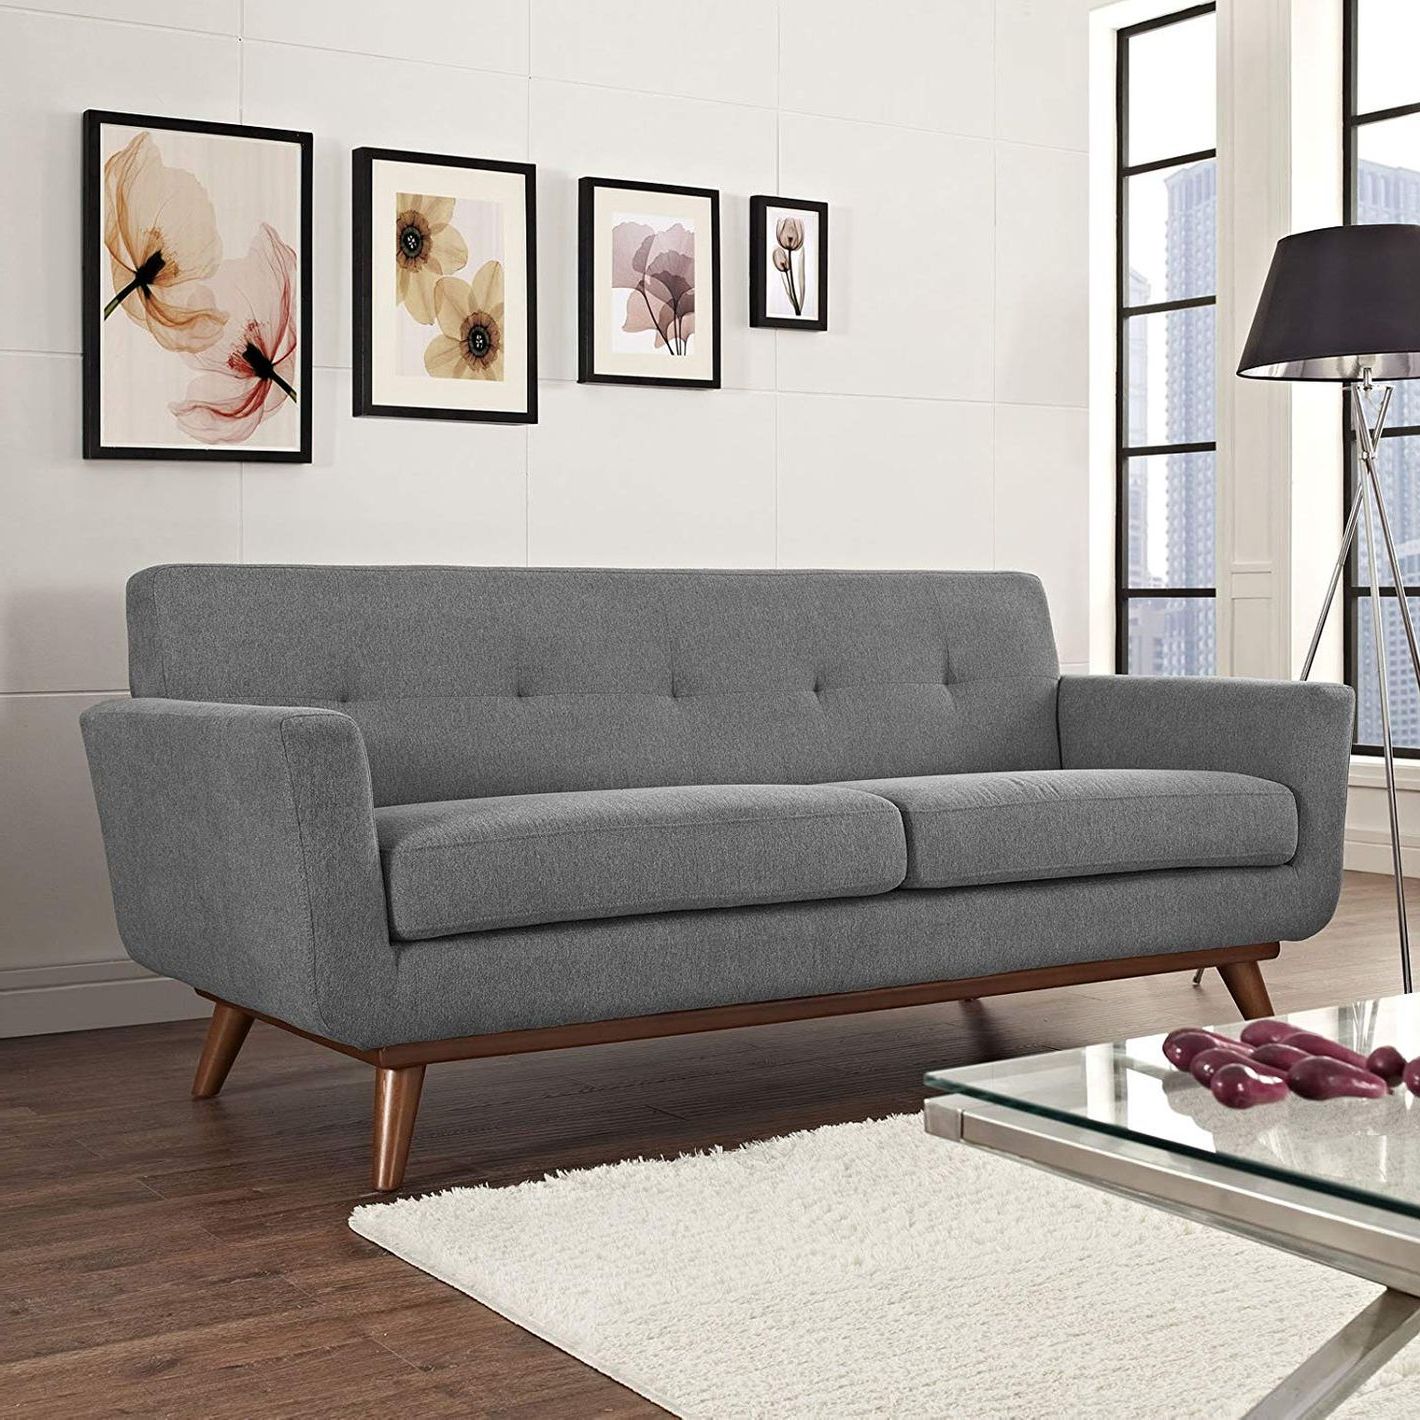 8 Best Love Seats 2021 | The Strategist With Regard To Modern Loveseat Sofas (View 2 of 20)